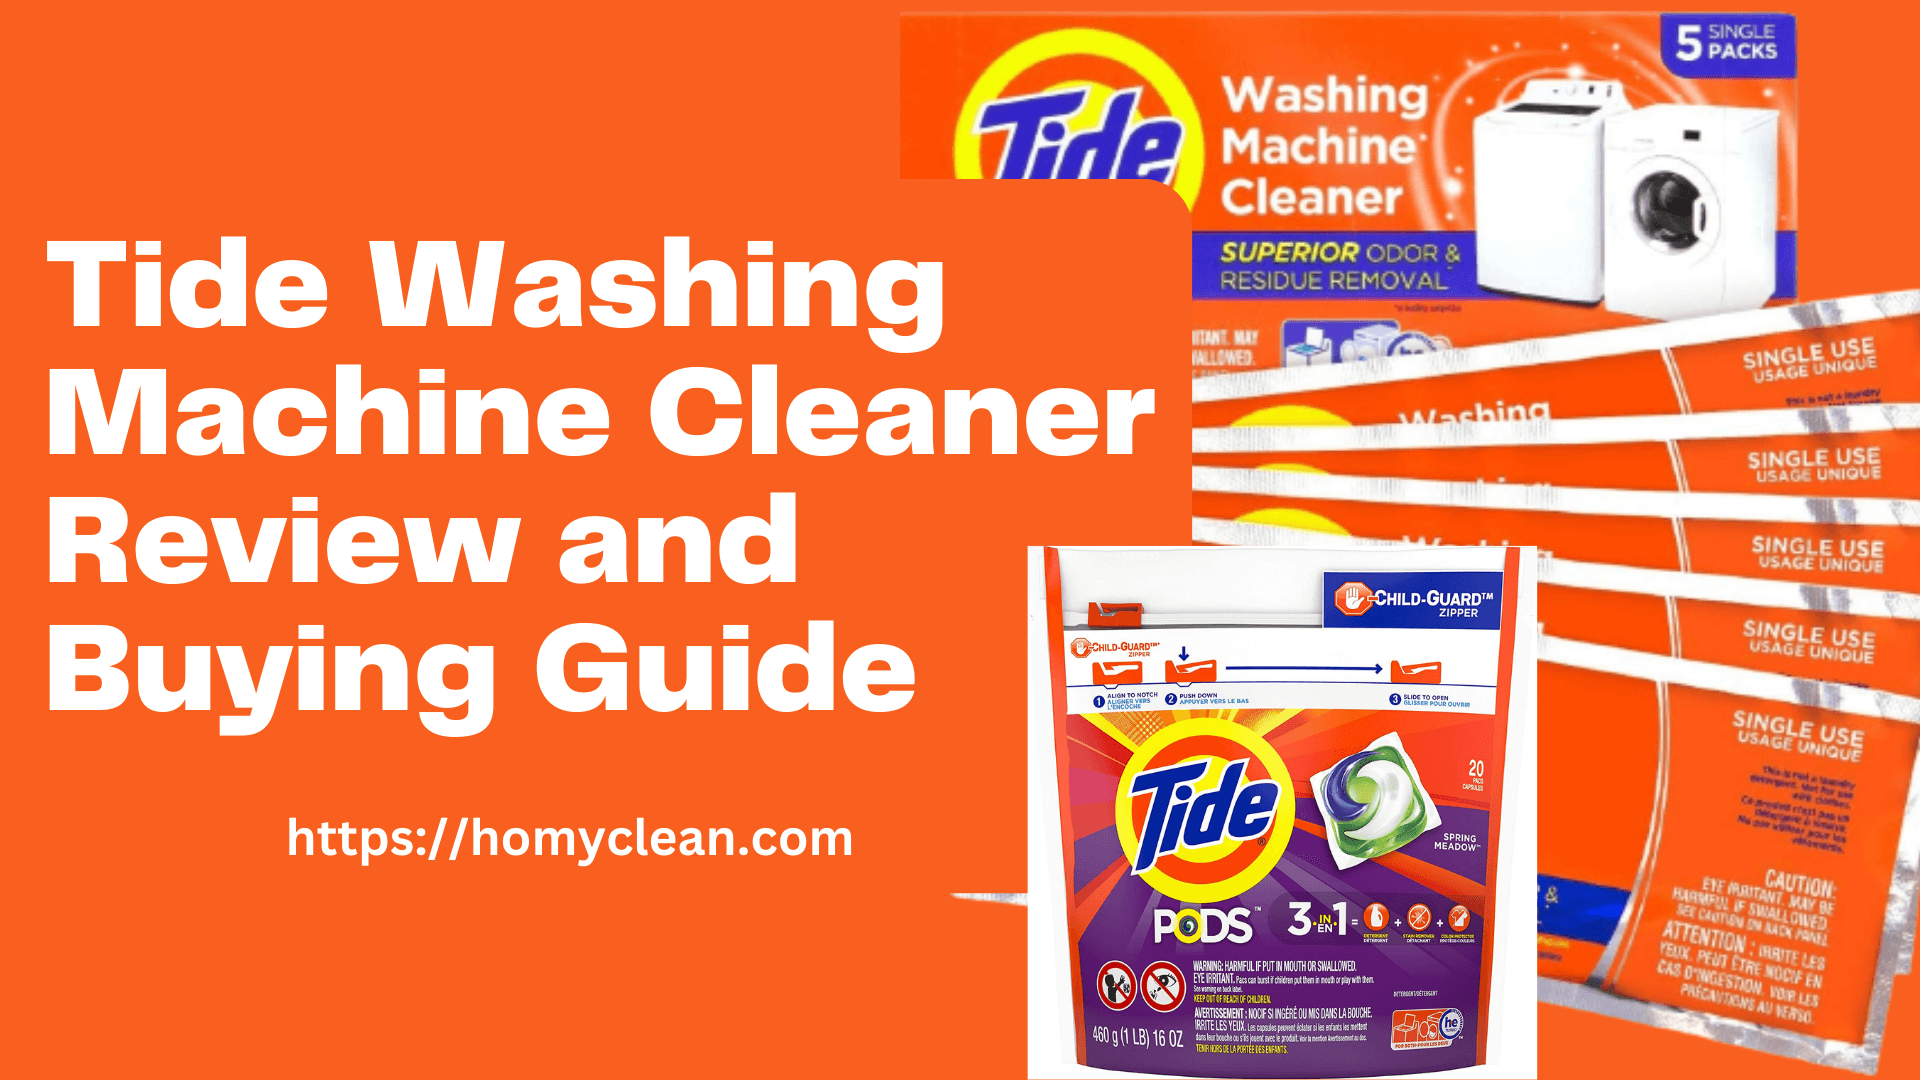 Tide Washing Machine Cleaner Review and Buying Guide